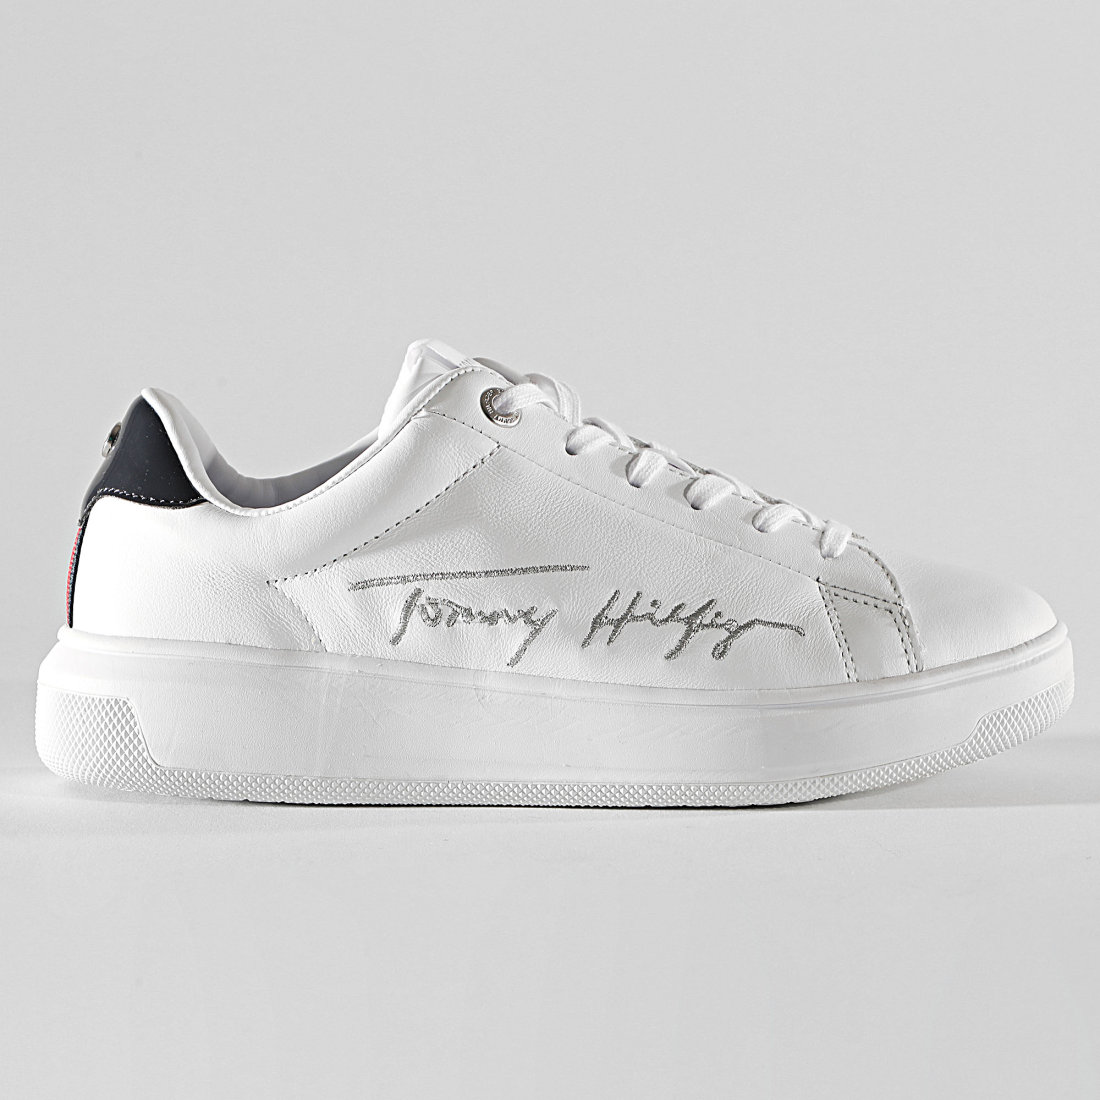 Tommy Hilfiger - Baskets Femme Signature Tommy Leather 5219 White